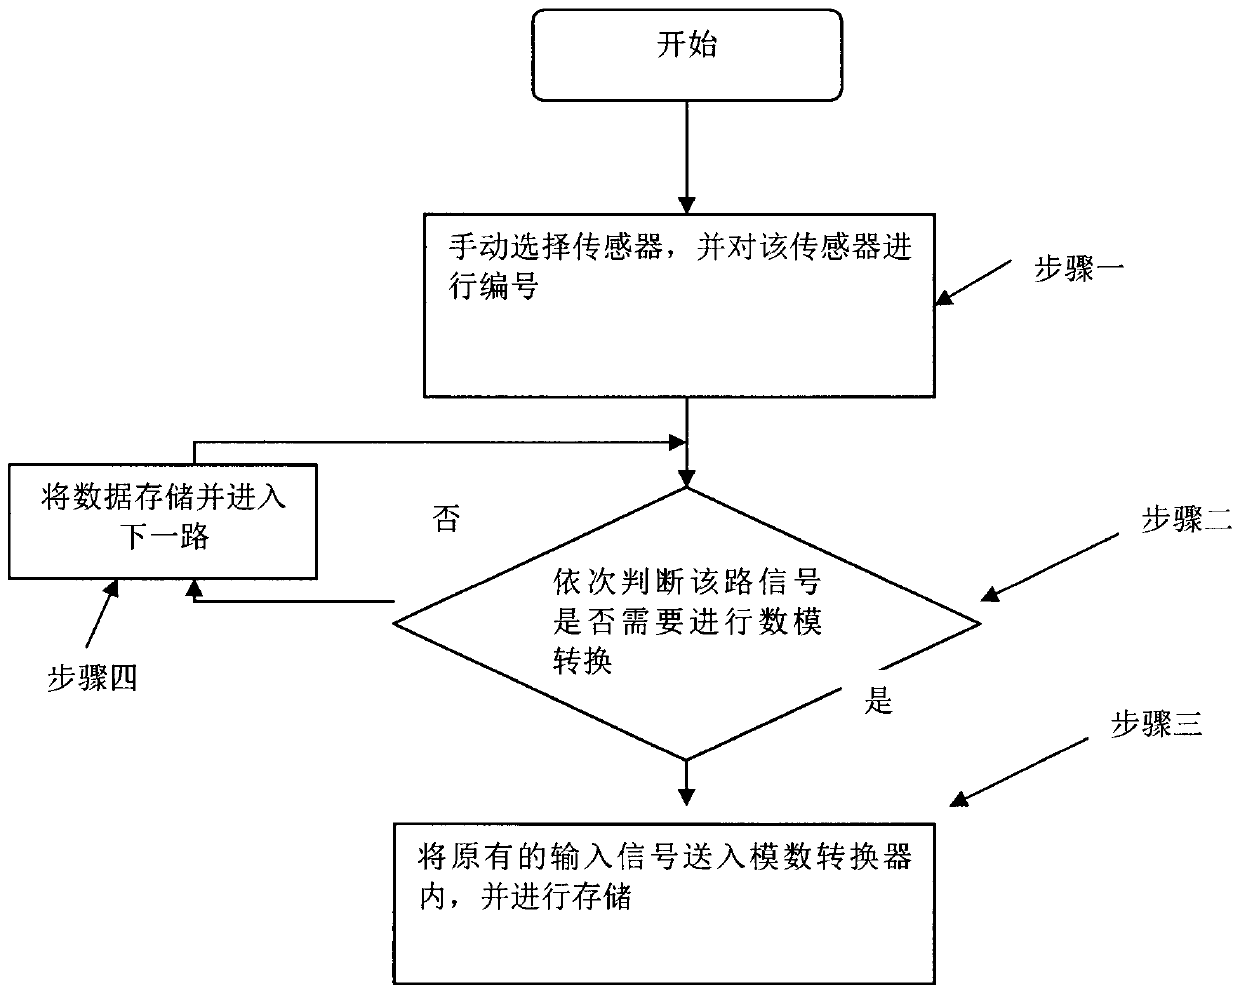 A kind of multi-channel mixed weighing system and method for multi-sensor weighing instrument